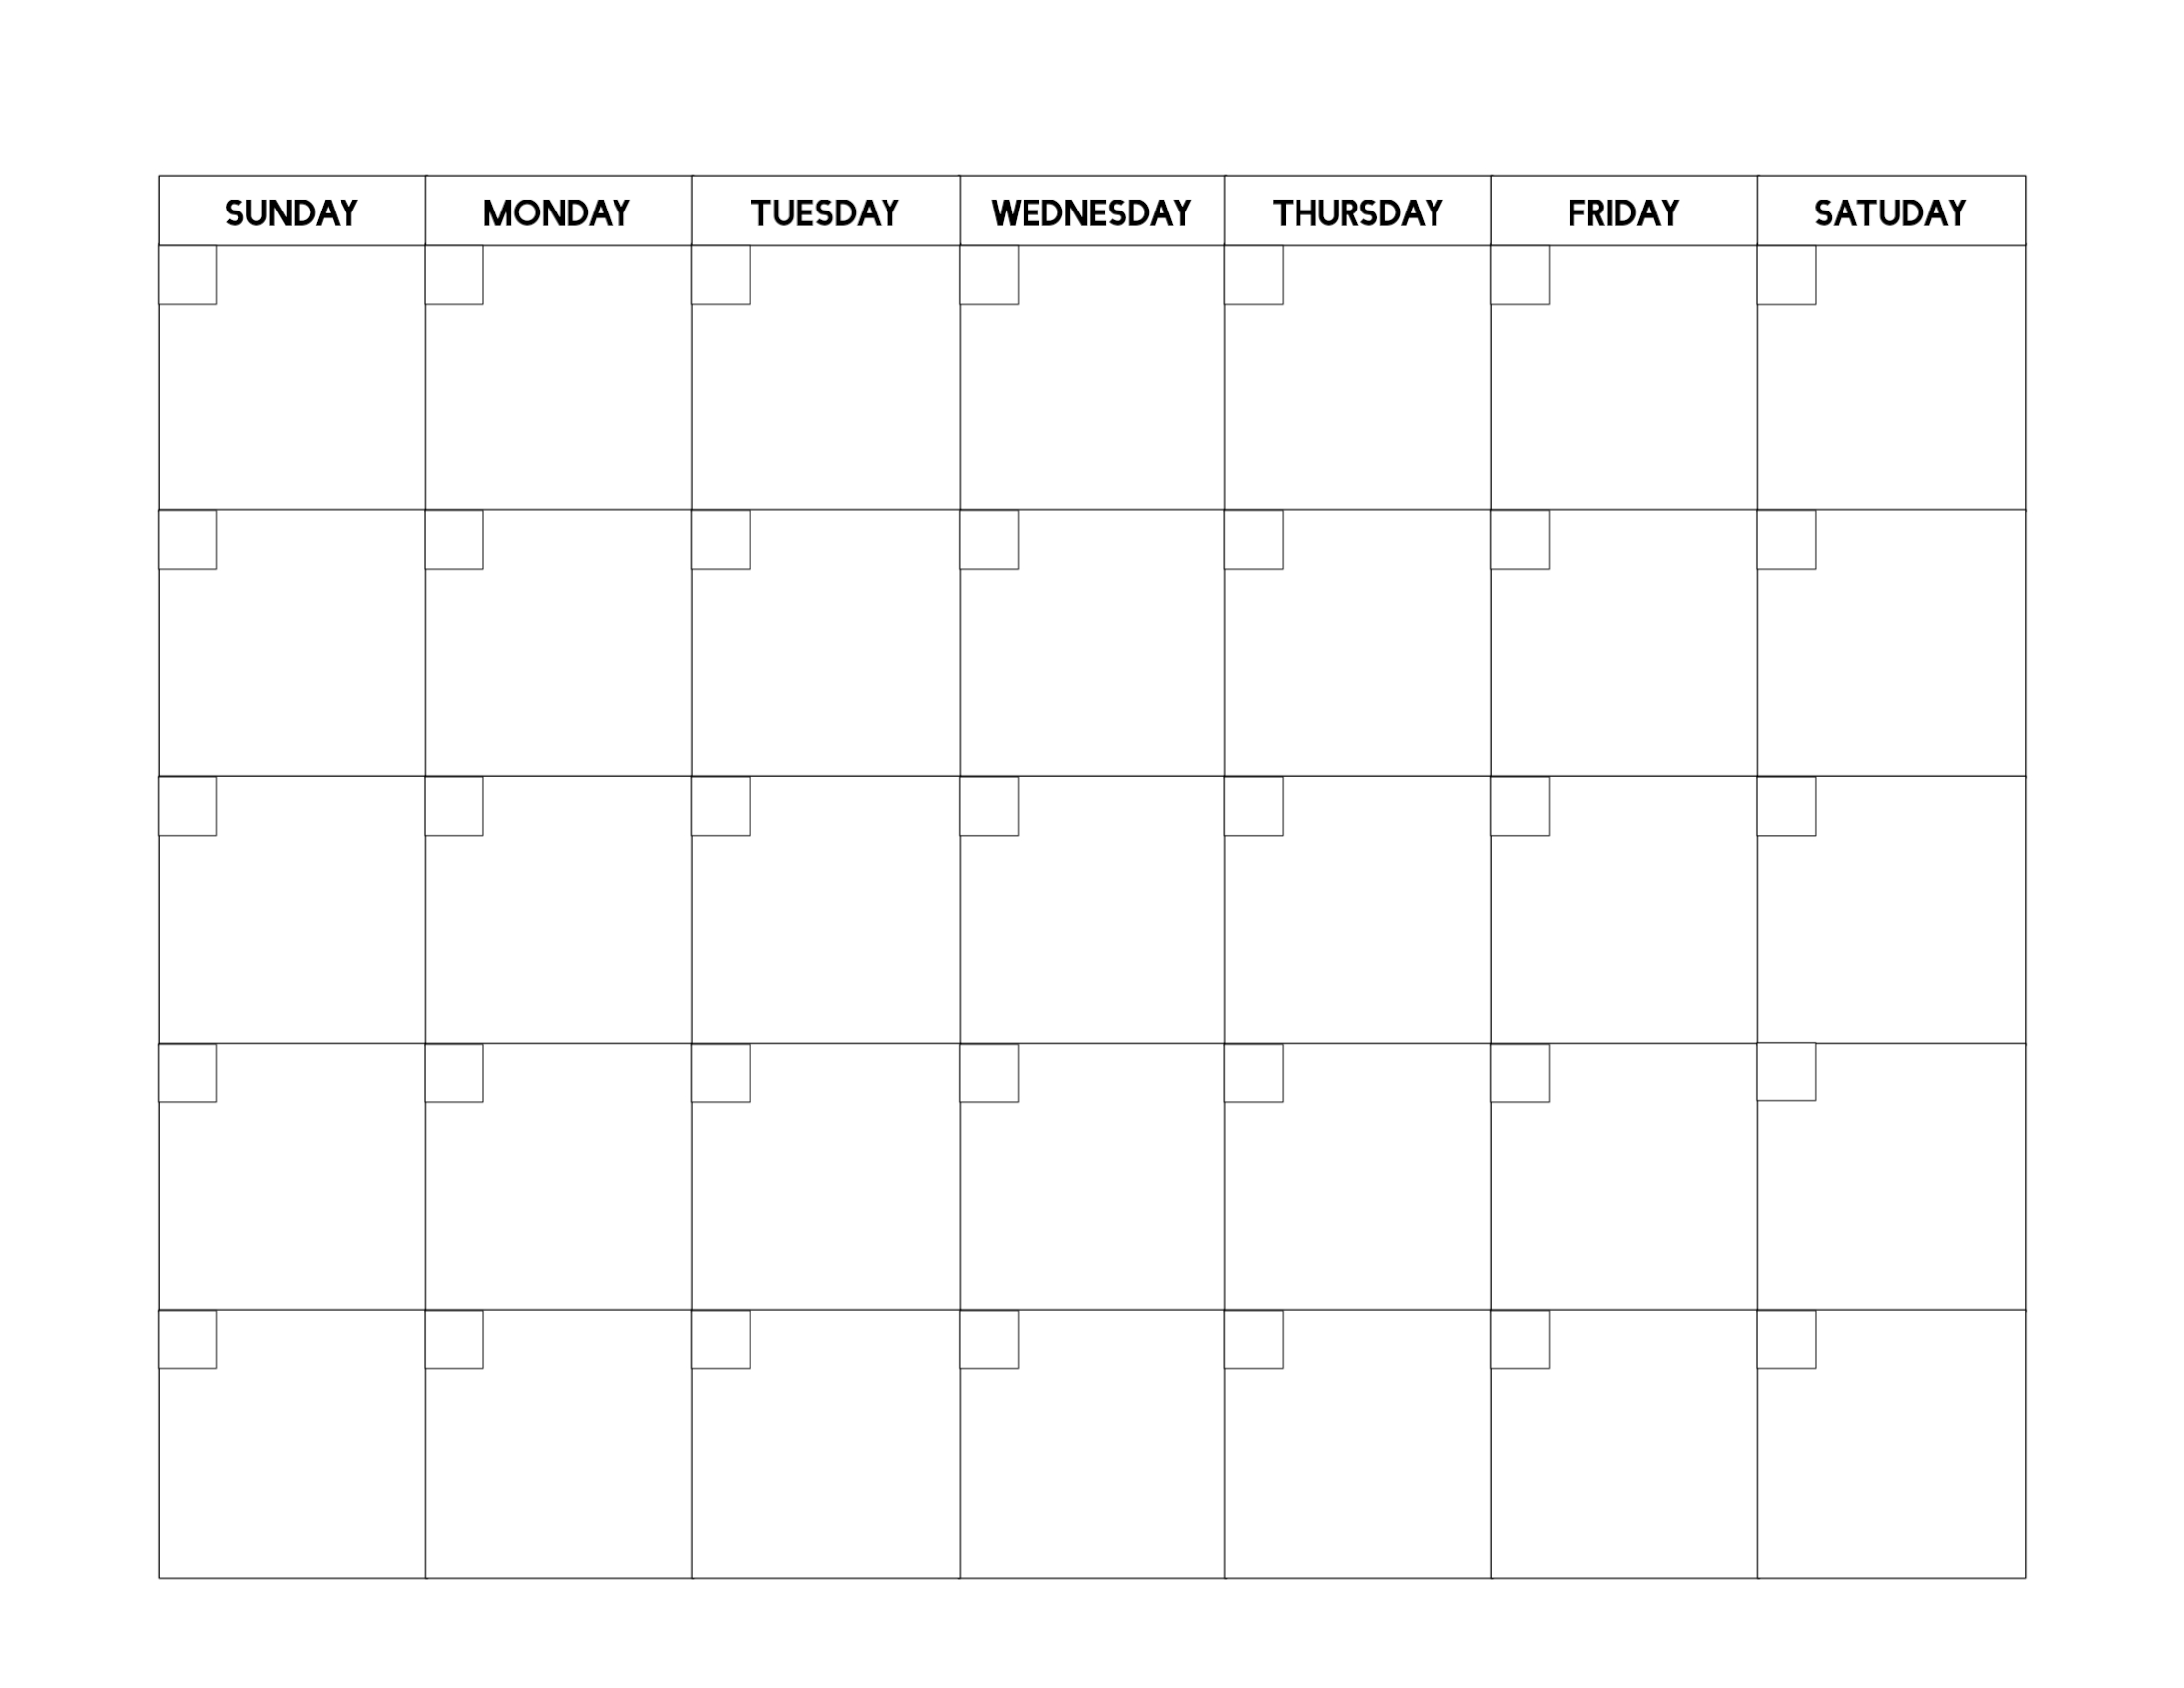 Free Printable Blank Calendar Template - Paper Trail Design Calendar To Fill In Template